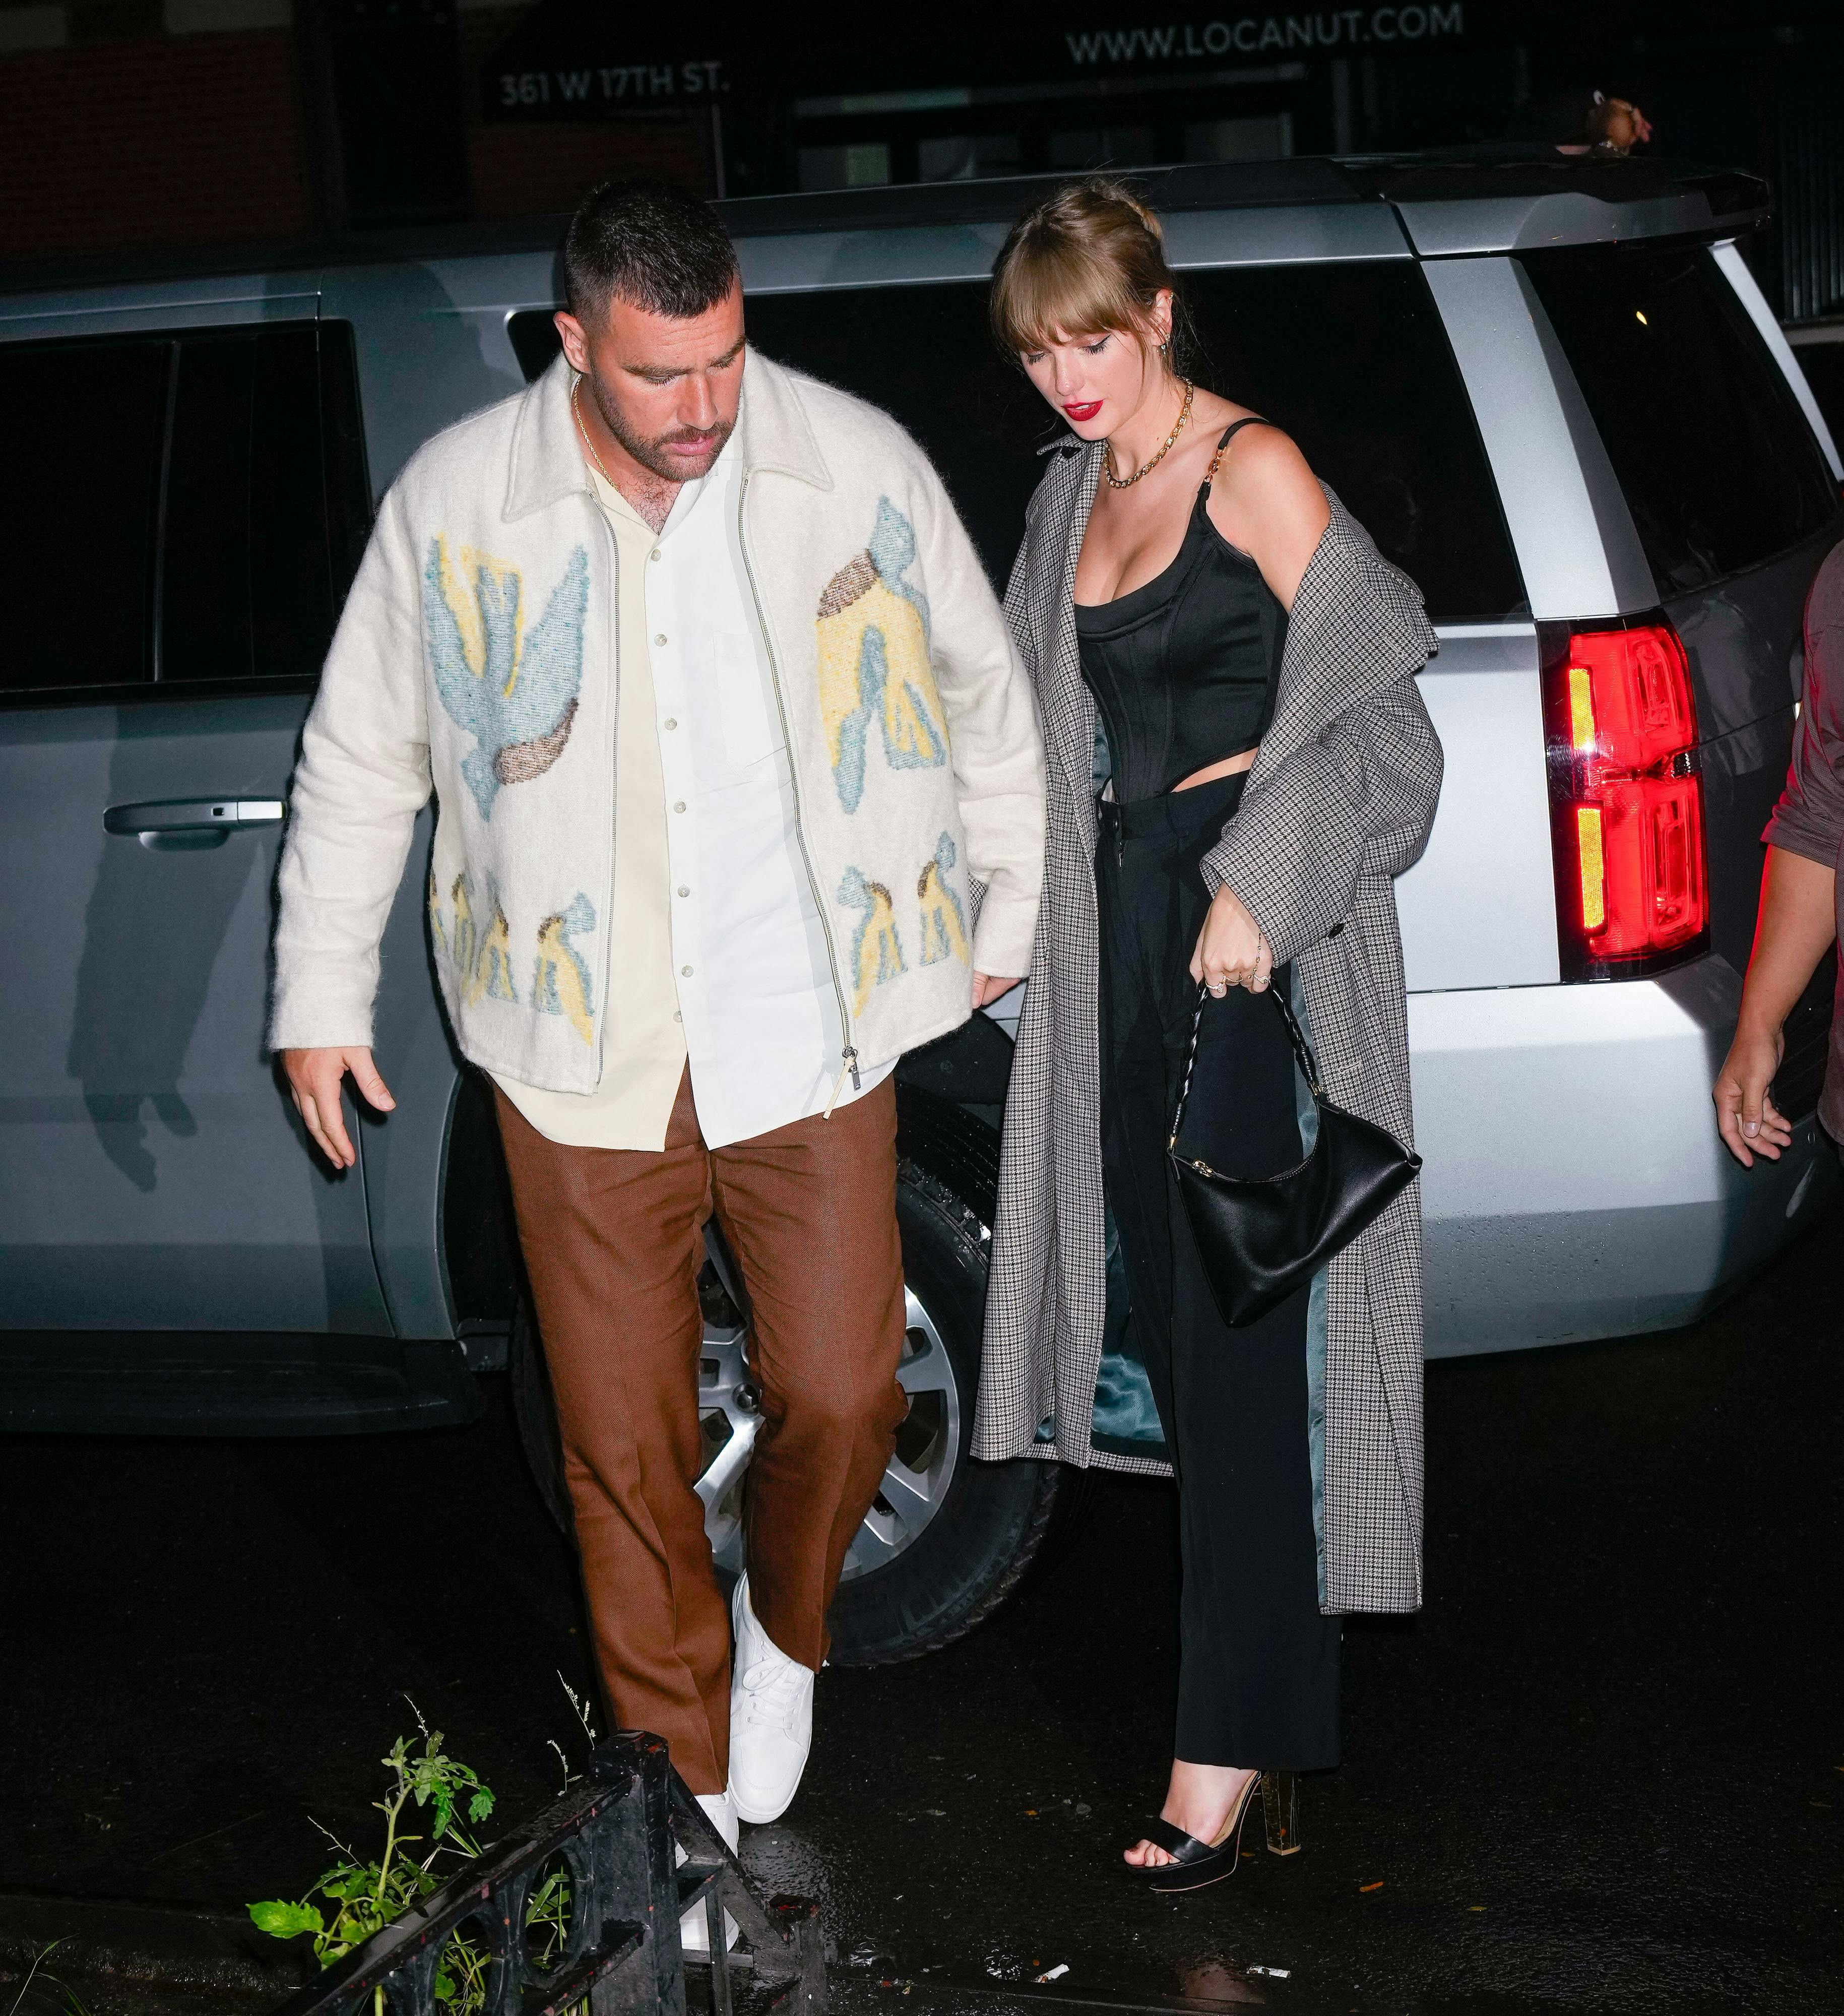 Taylor Swift and Travis Kelce attend the SNL afterparty in New York. 15 Oct 2023 Pictured: Taylor Swift, Travis Kelce. Photo credit: MEGA TheMegaAgency.com +1 888 505 6342 (Mega Agency TagID: MEGA1046369_014.jpg) [Photo via Mega Agency]